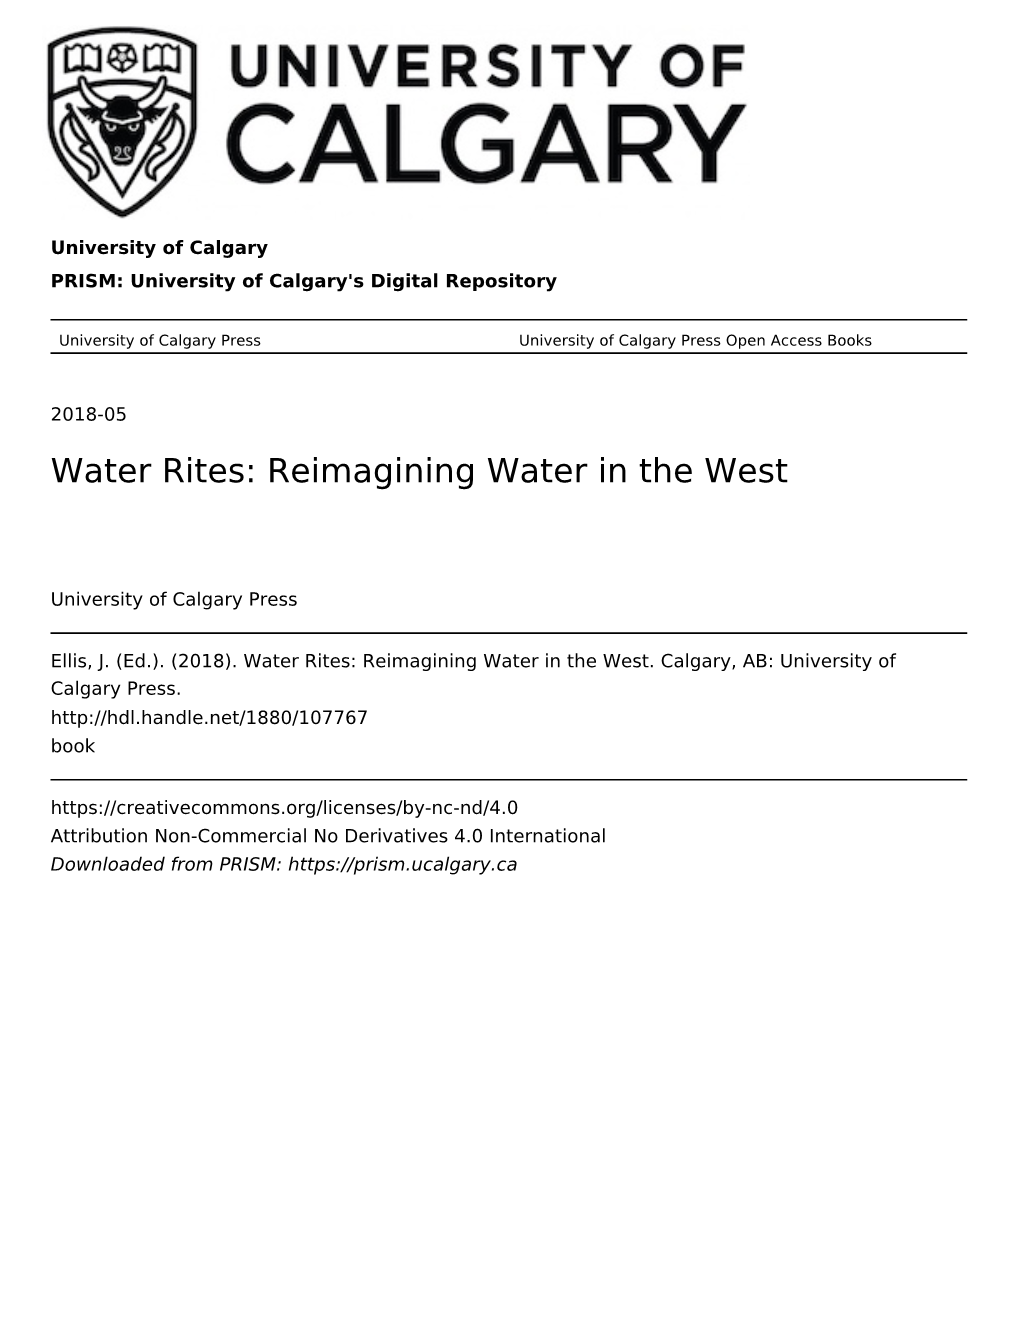 Water Rights/Water Justice